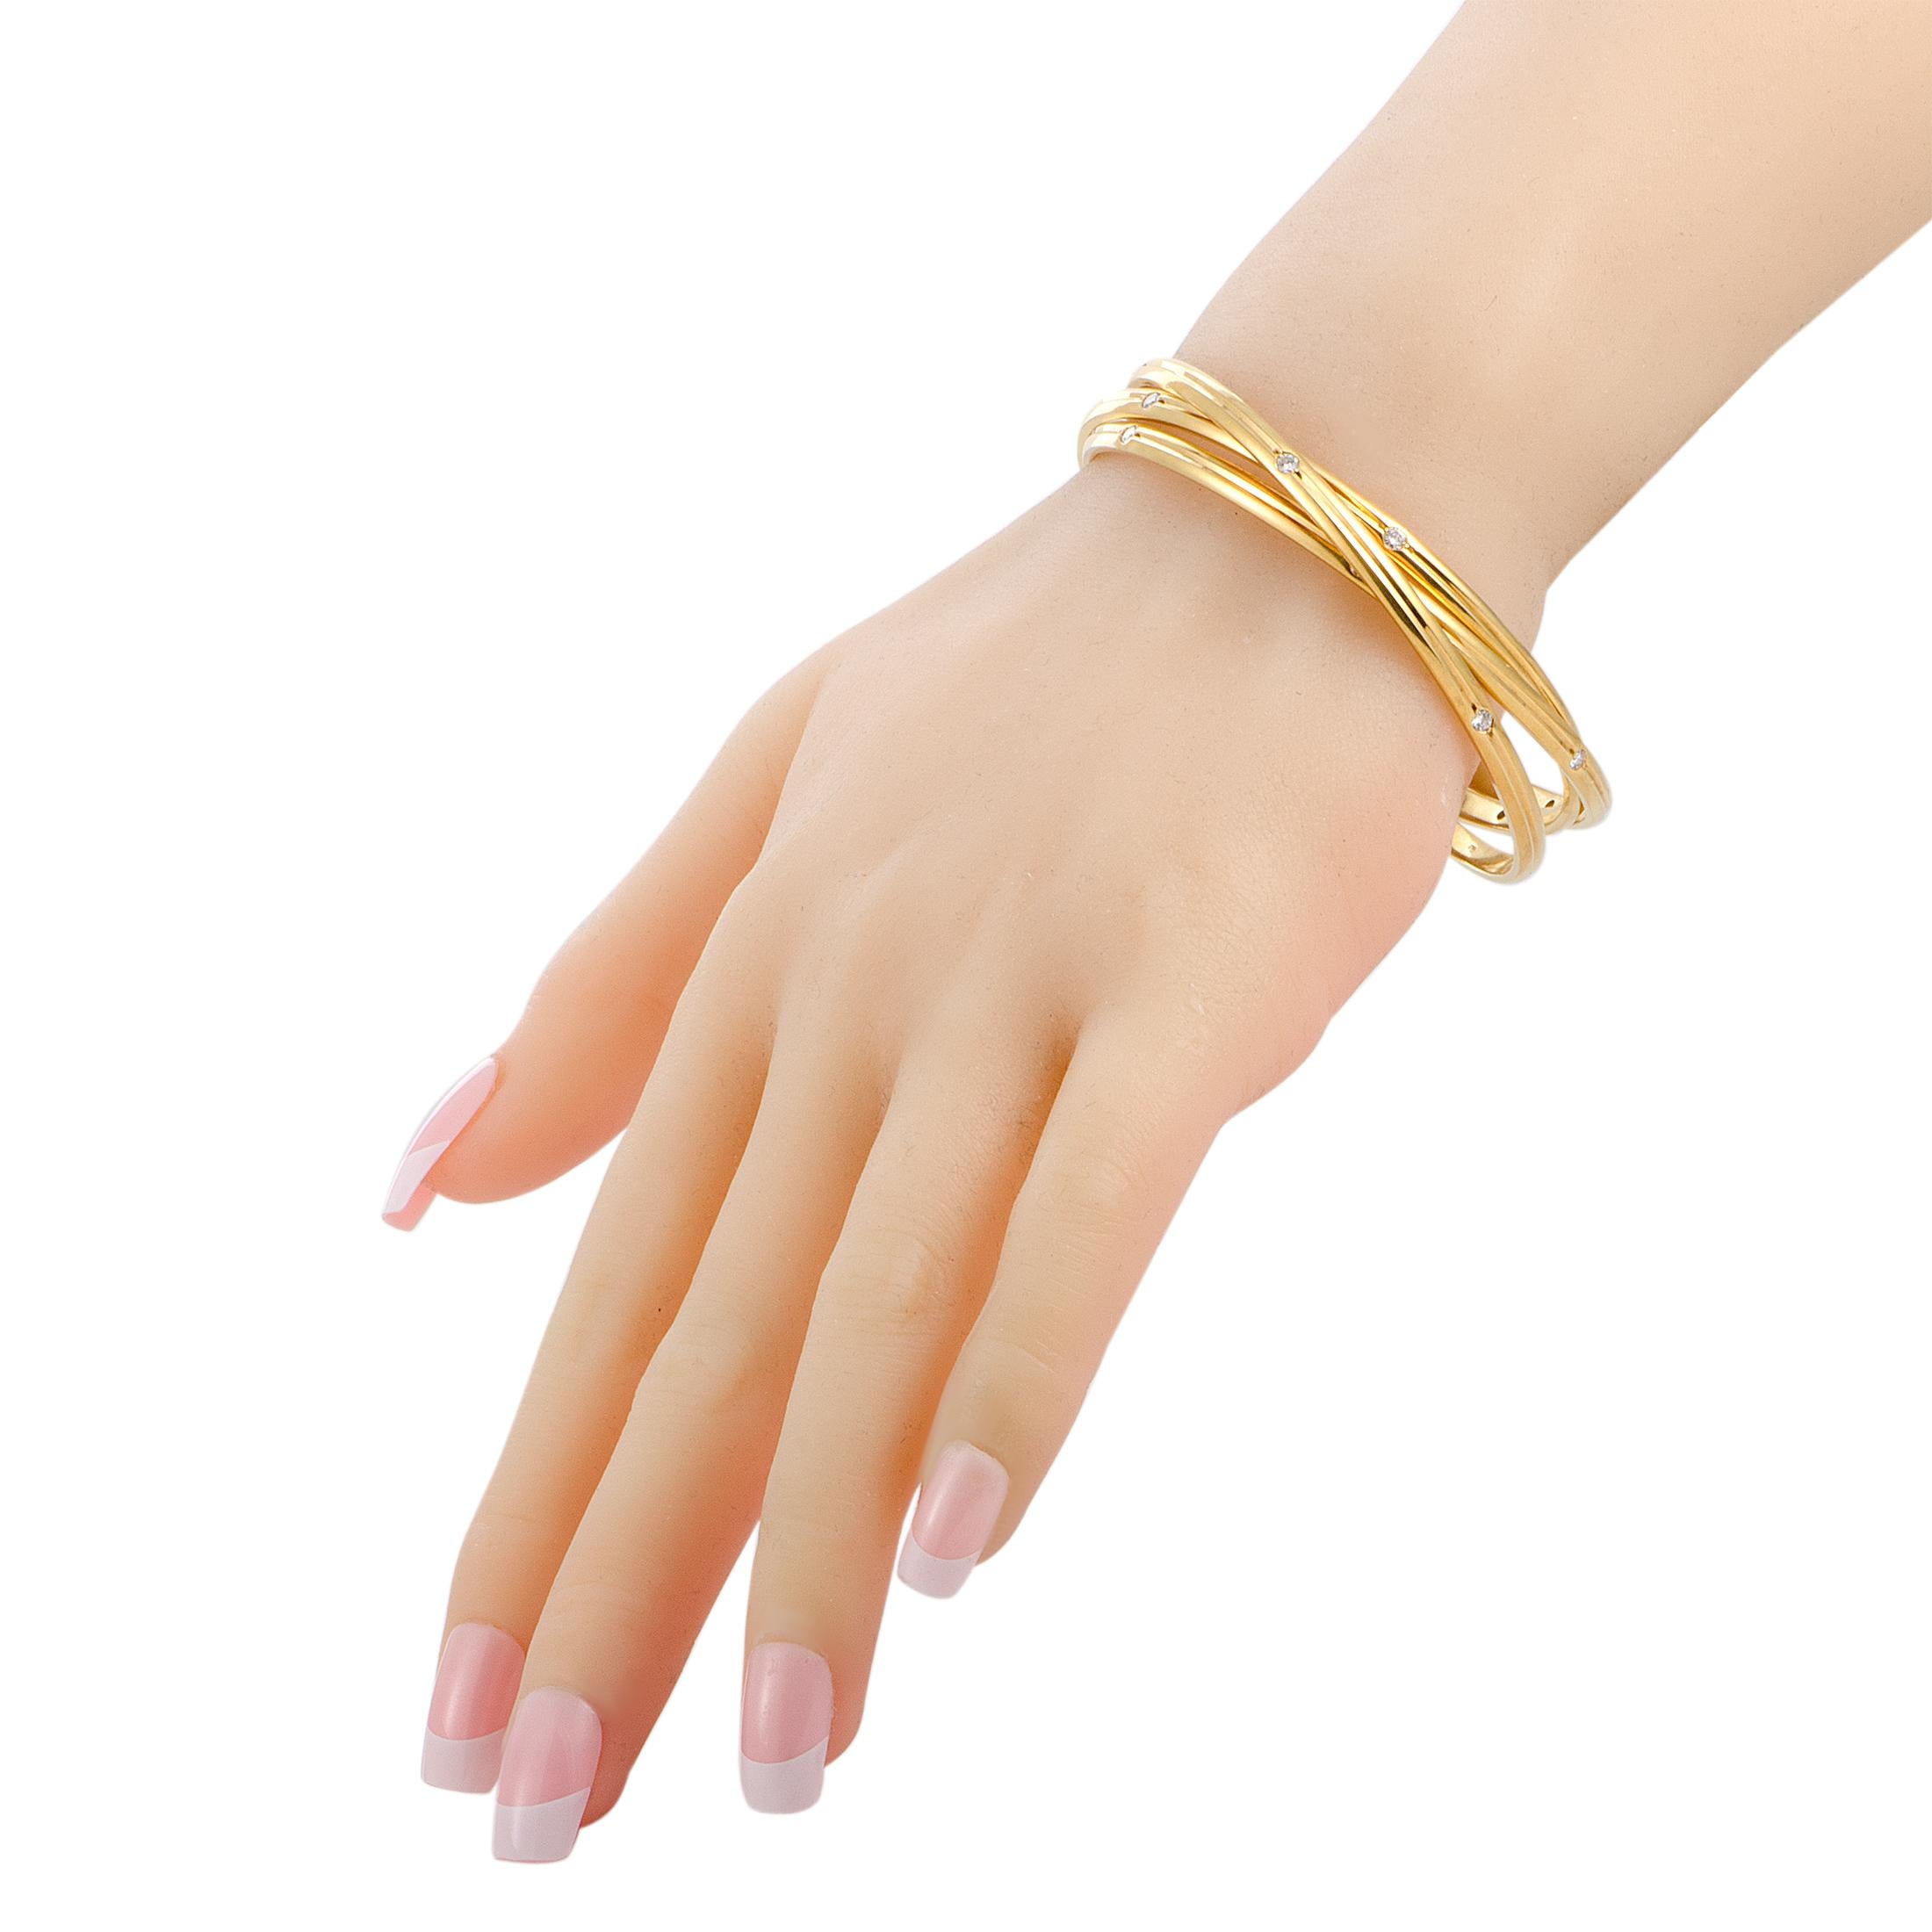 Presented within the renowned “Trinity” collection, this sublime Cartier piece includes three gorgeous bangle bracelets that are tastefully decorated with scintillating diamonds. The bangles are expertly crafted from luxurious 18K yellow gold and